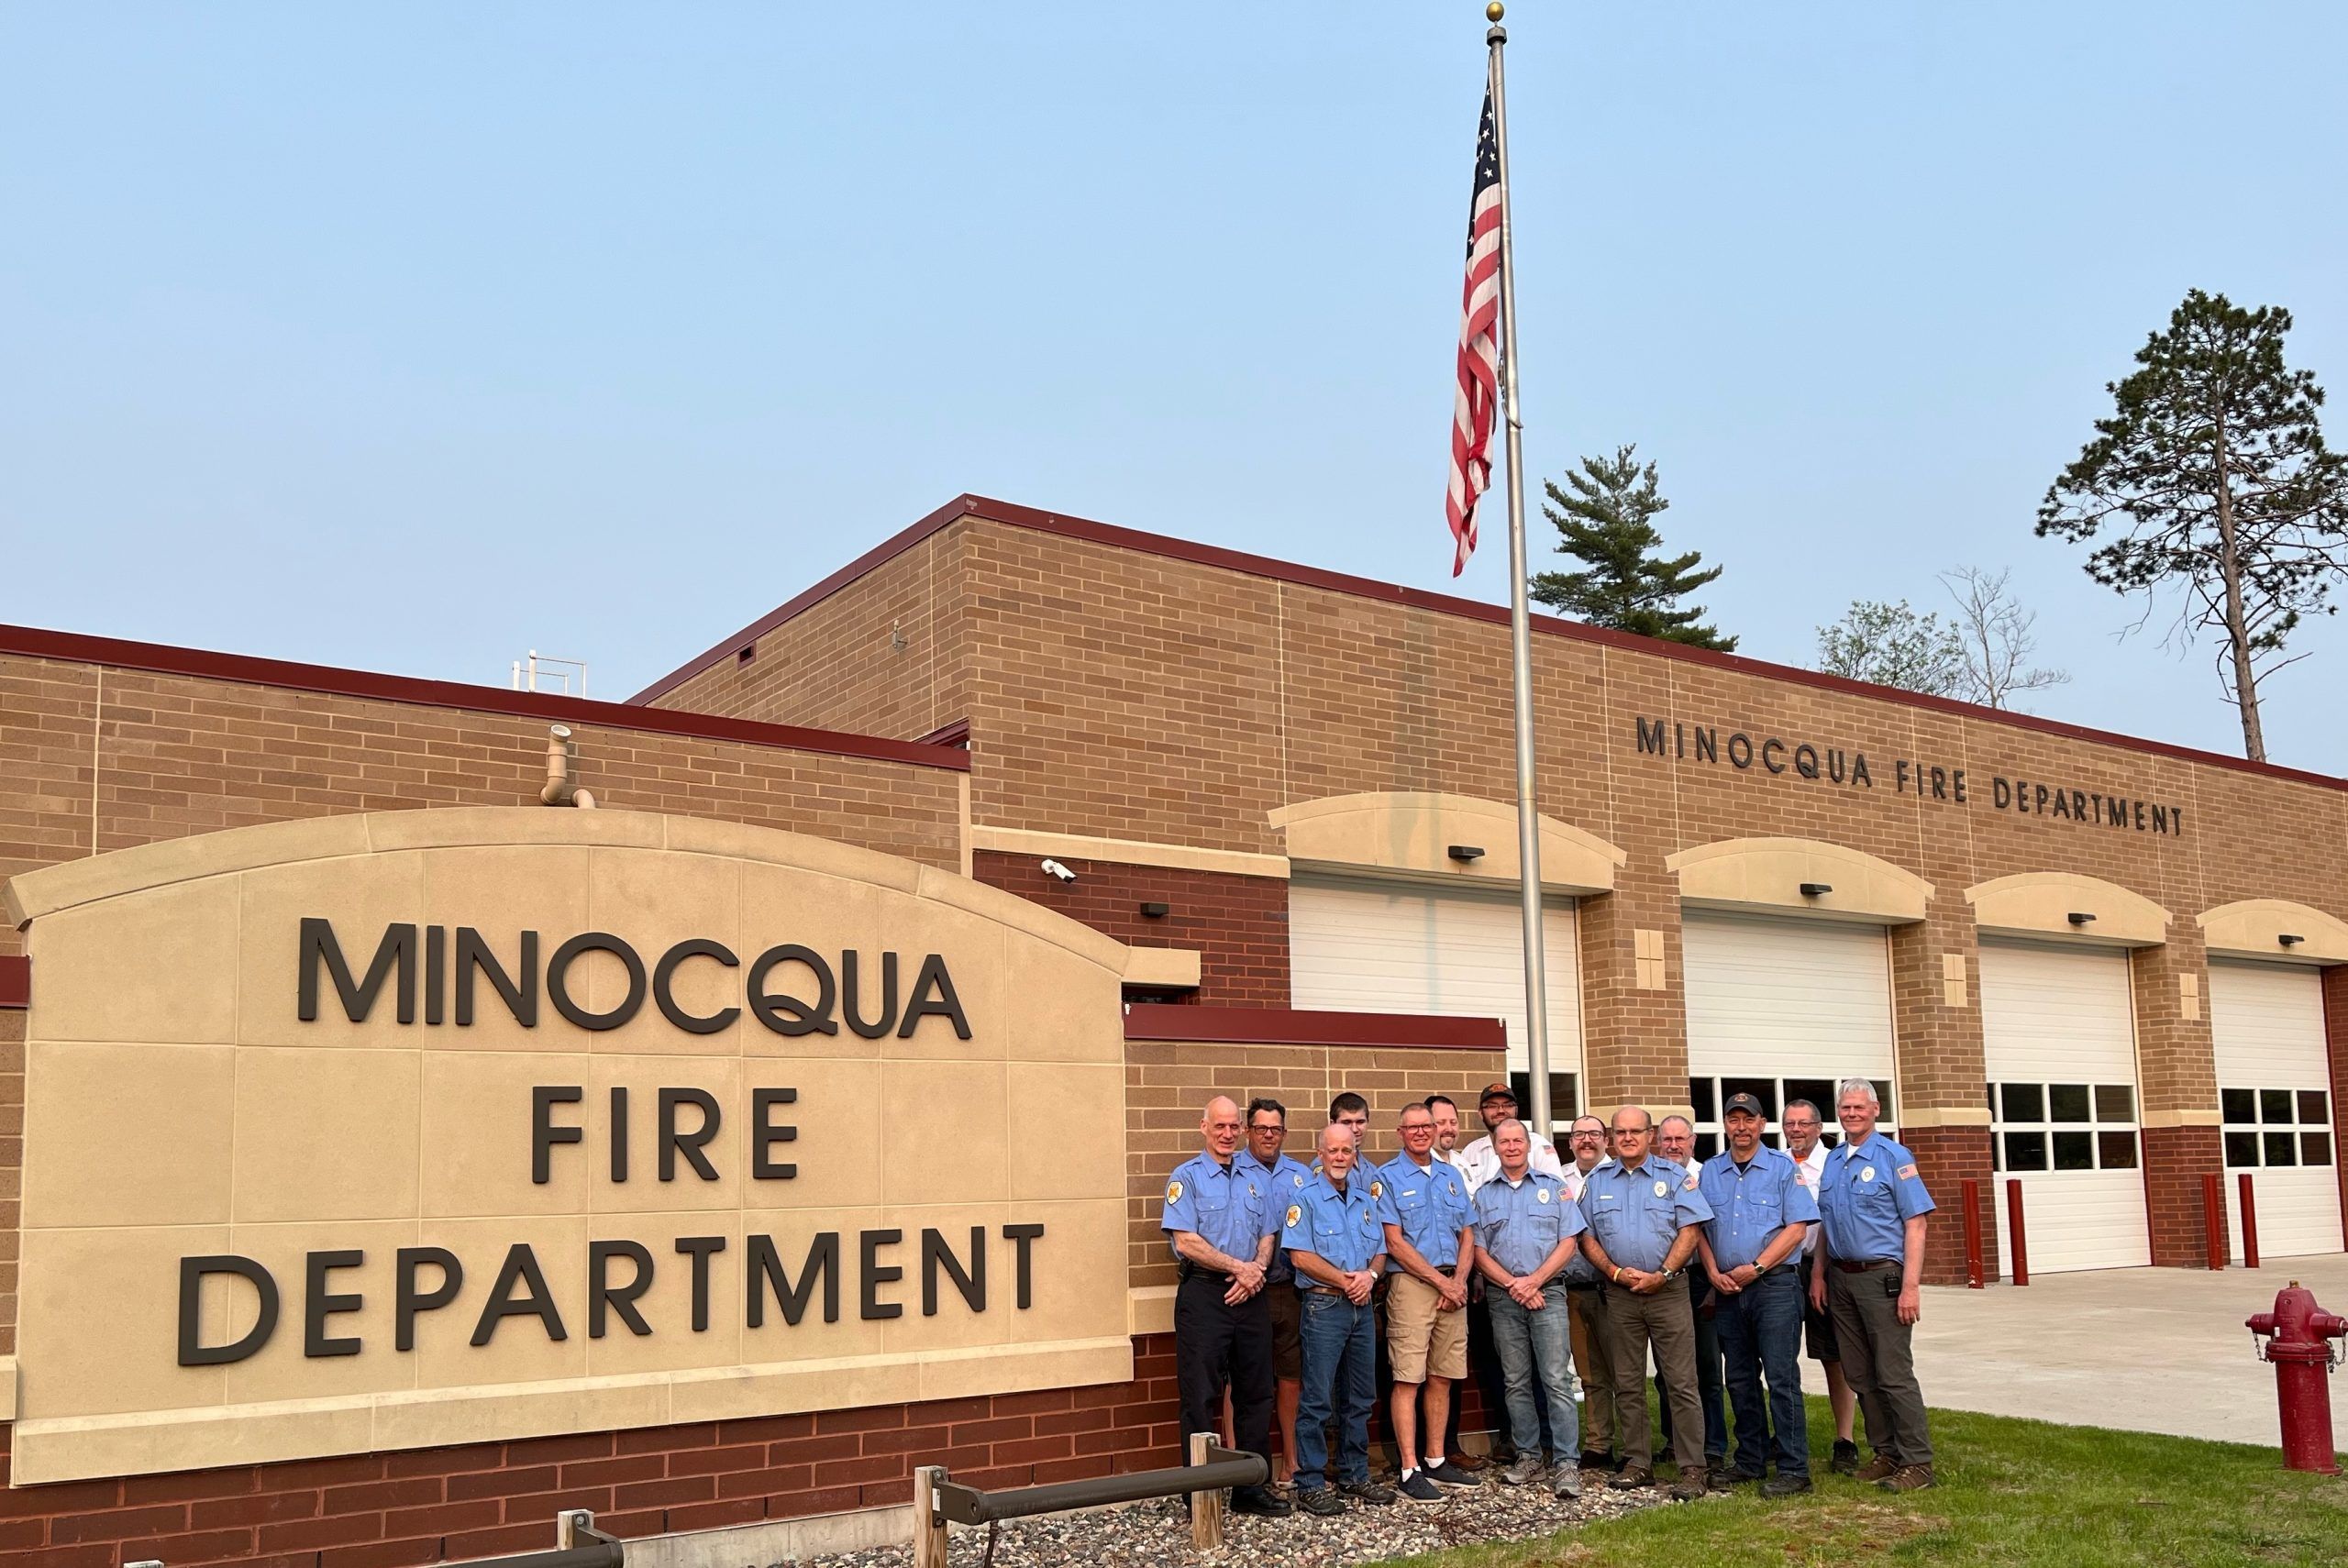 The Minocqua fire department staff in front the station